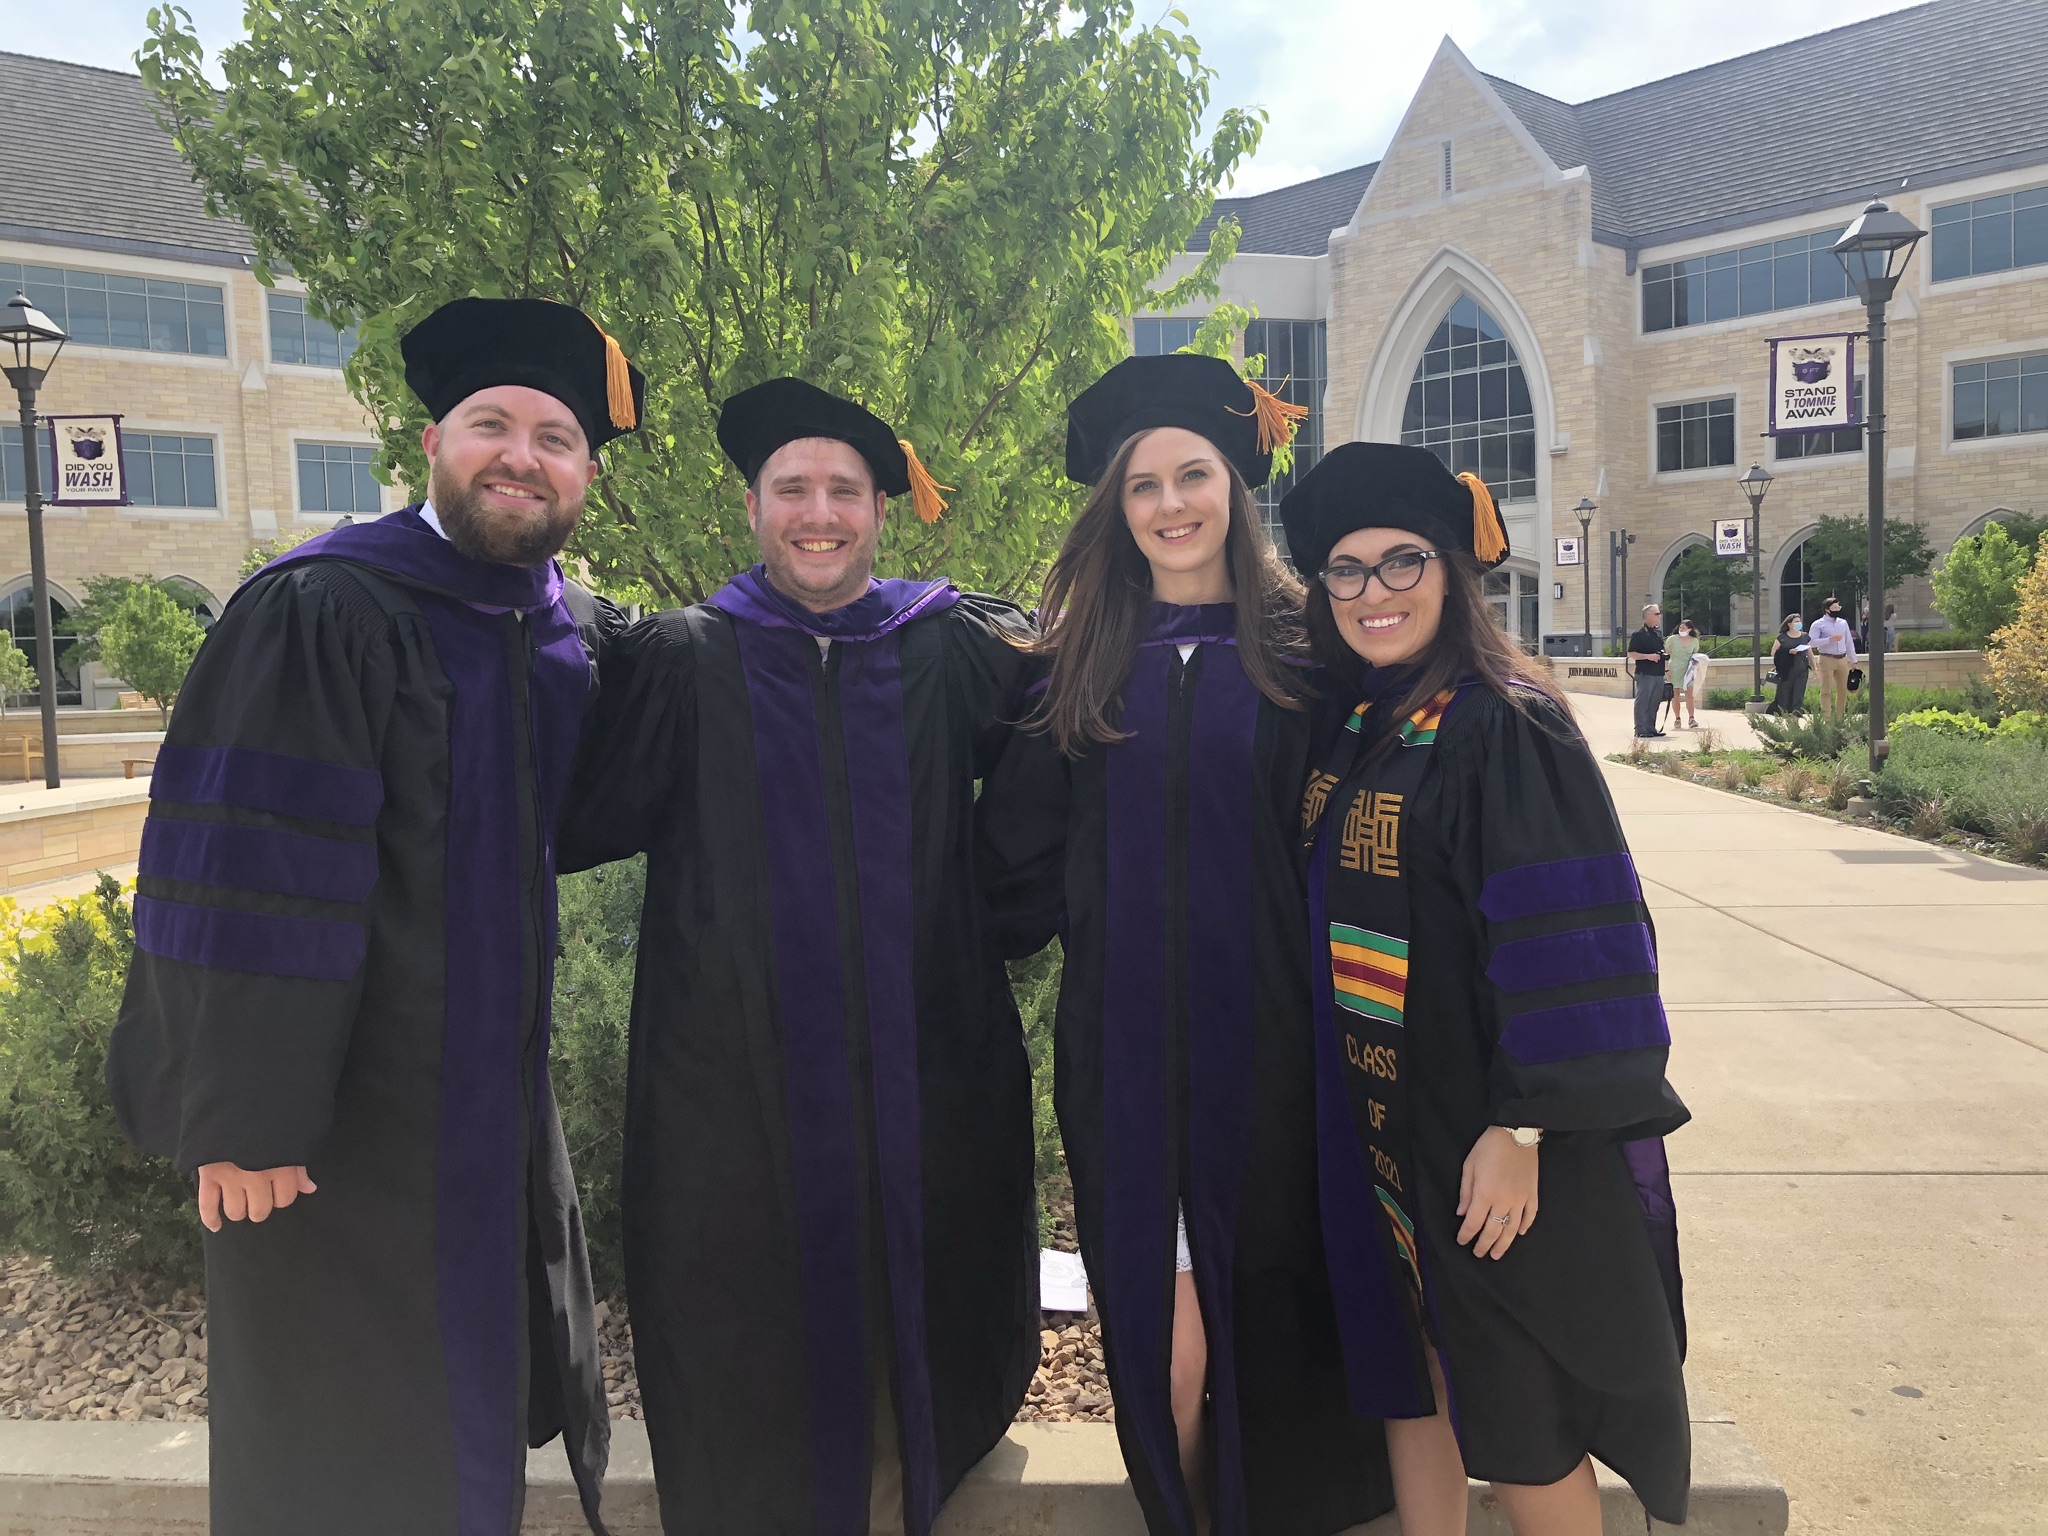 Law students Tim Anderson, Hannah Spencer, Sarah Theisen and Dylan Wallace.